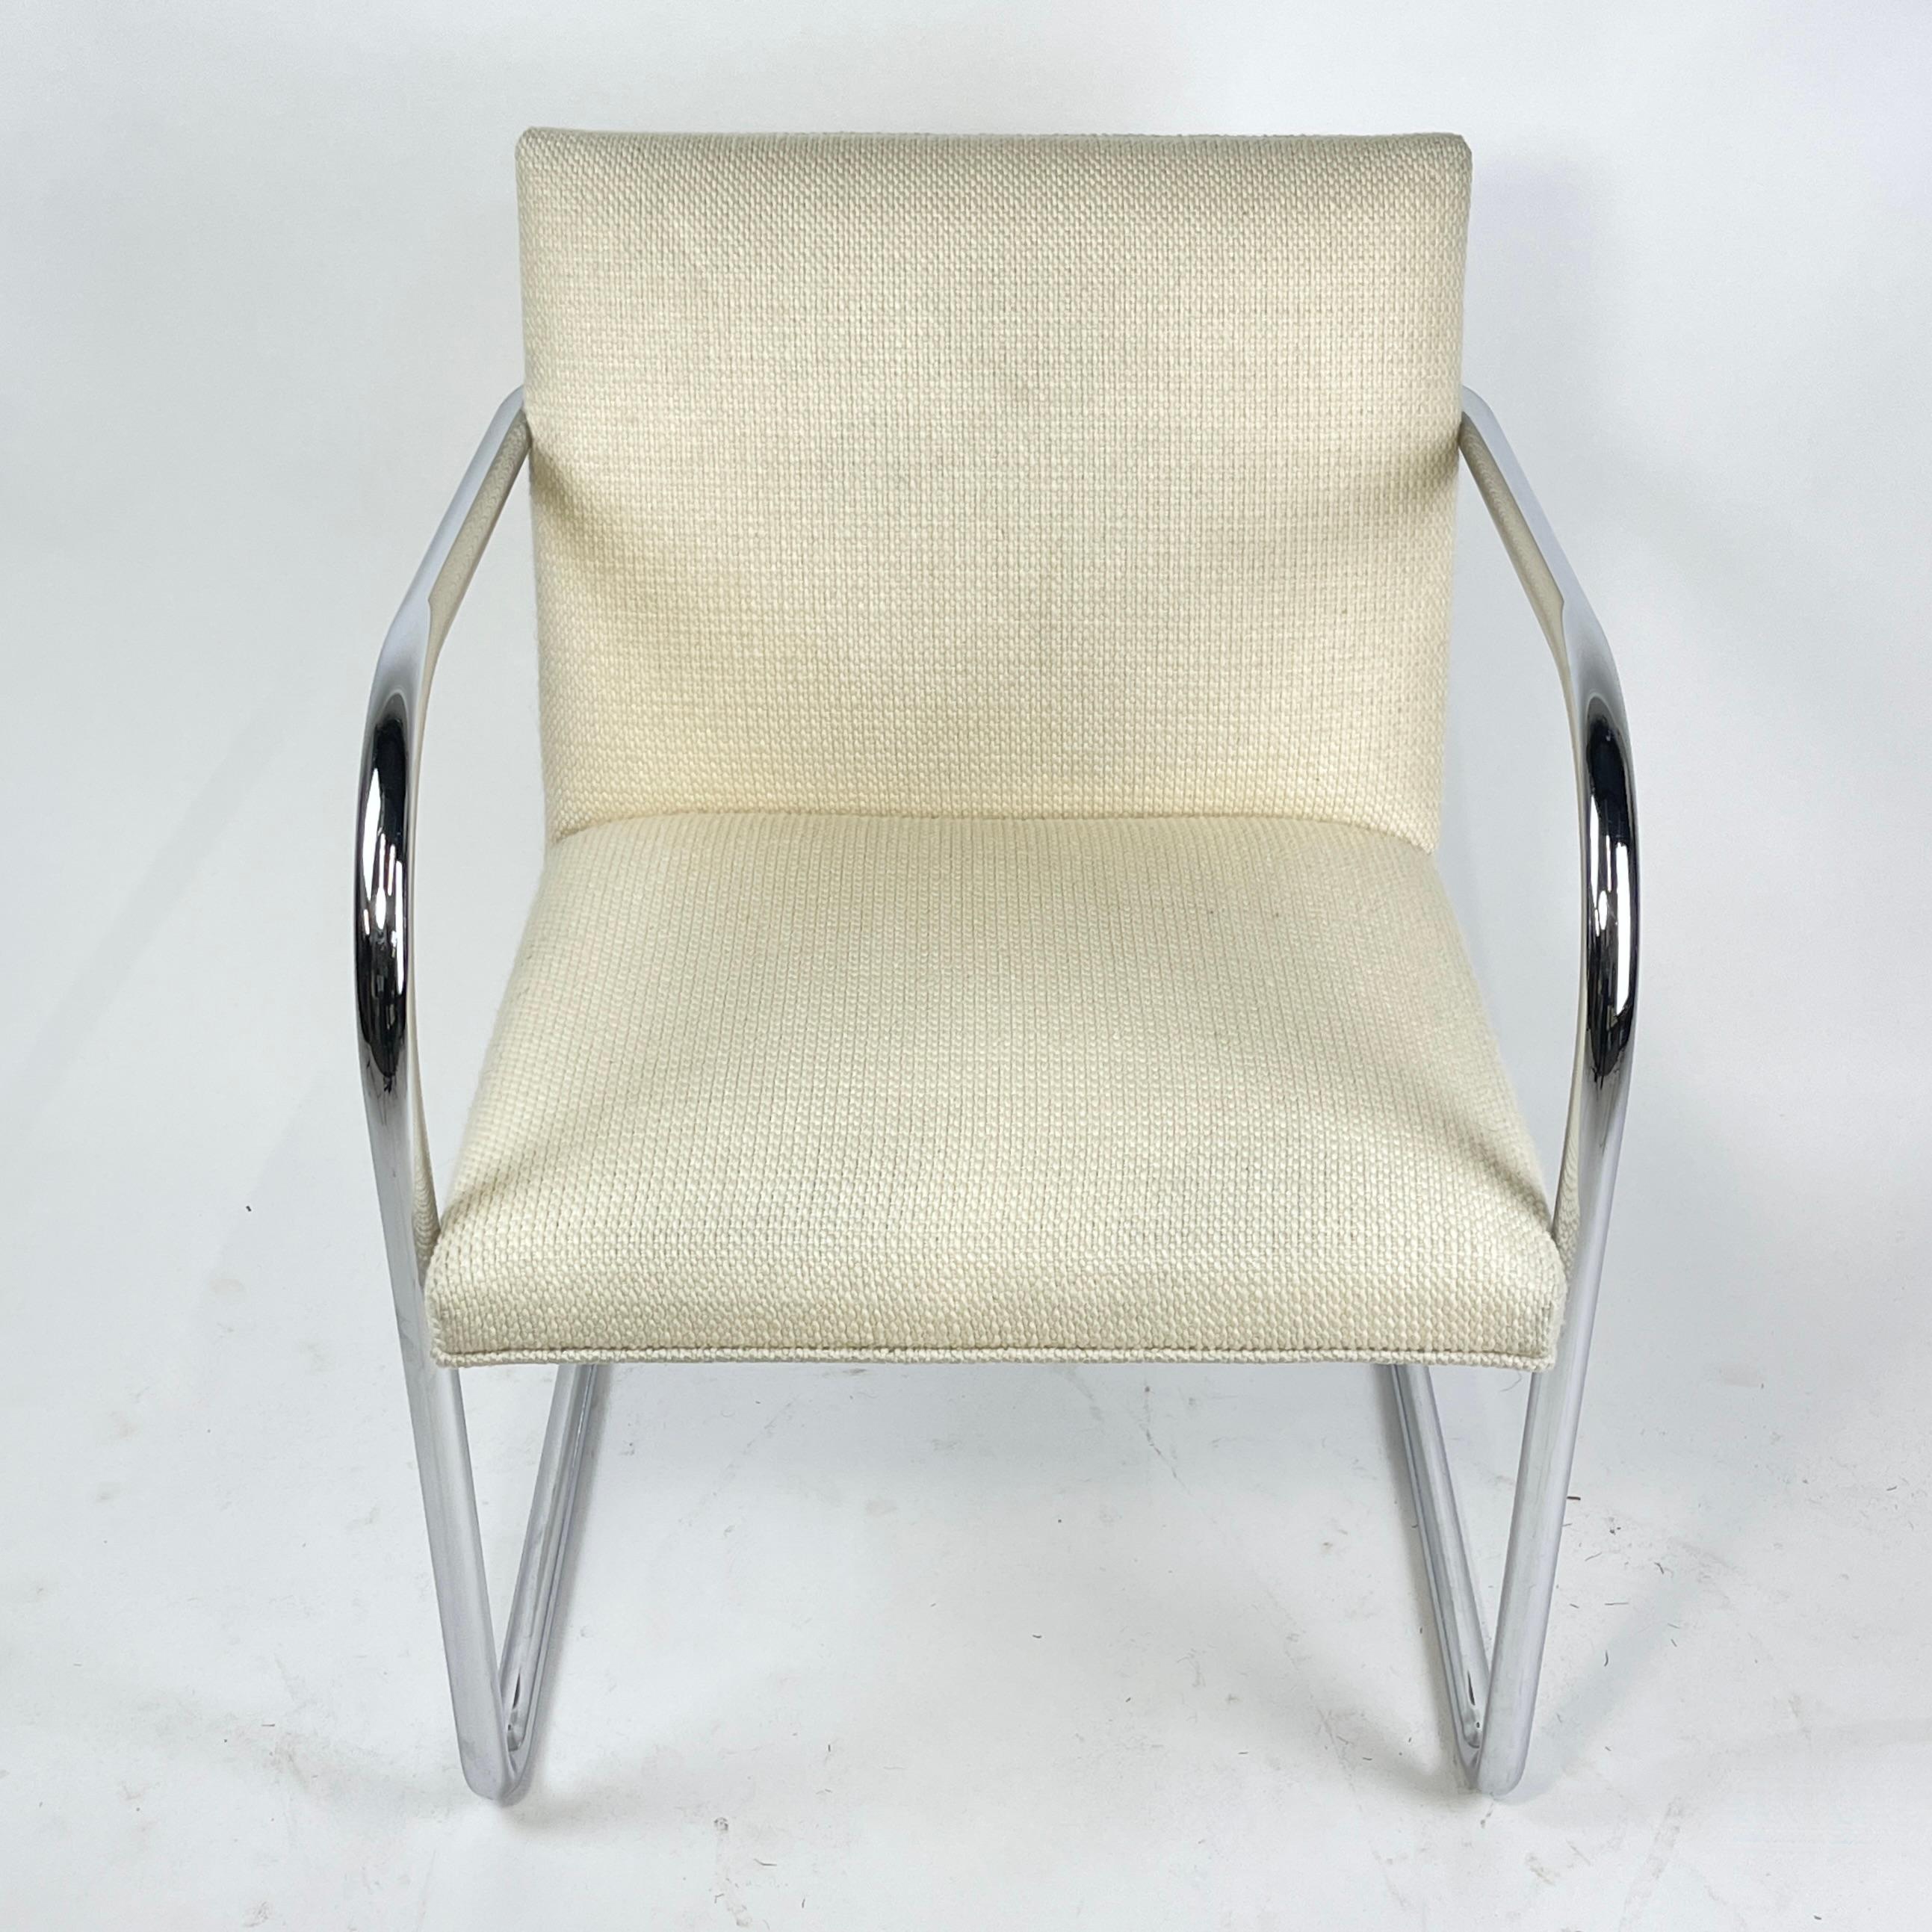 Steel Set of 4 Mies Van Der Rohe for Knoll Brno Chairs in Cato Upholstery 60 available For Sale